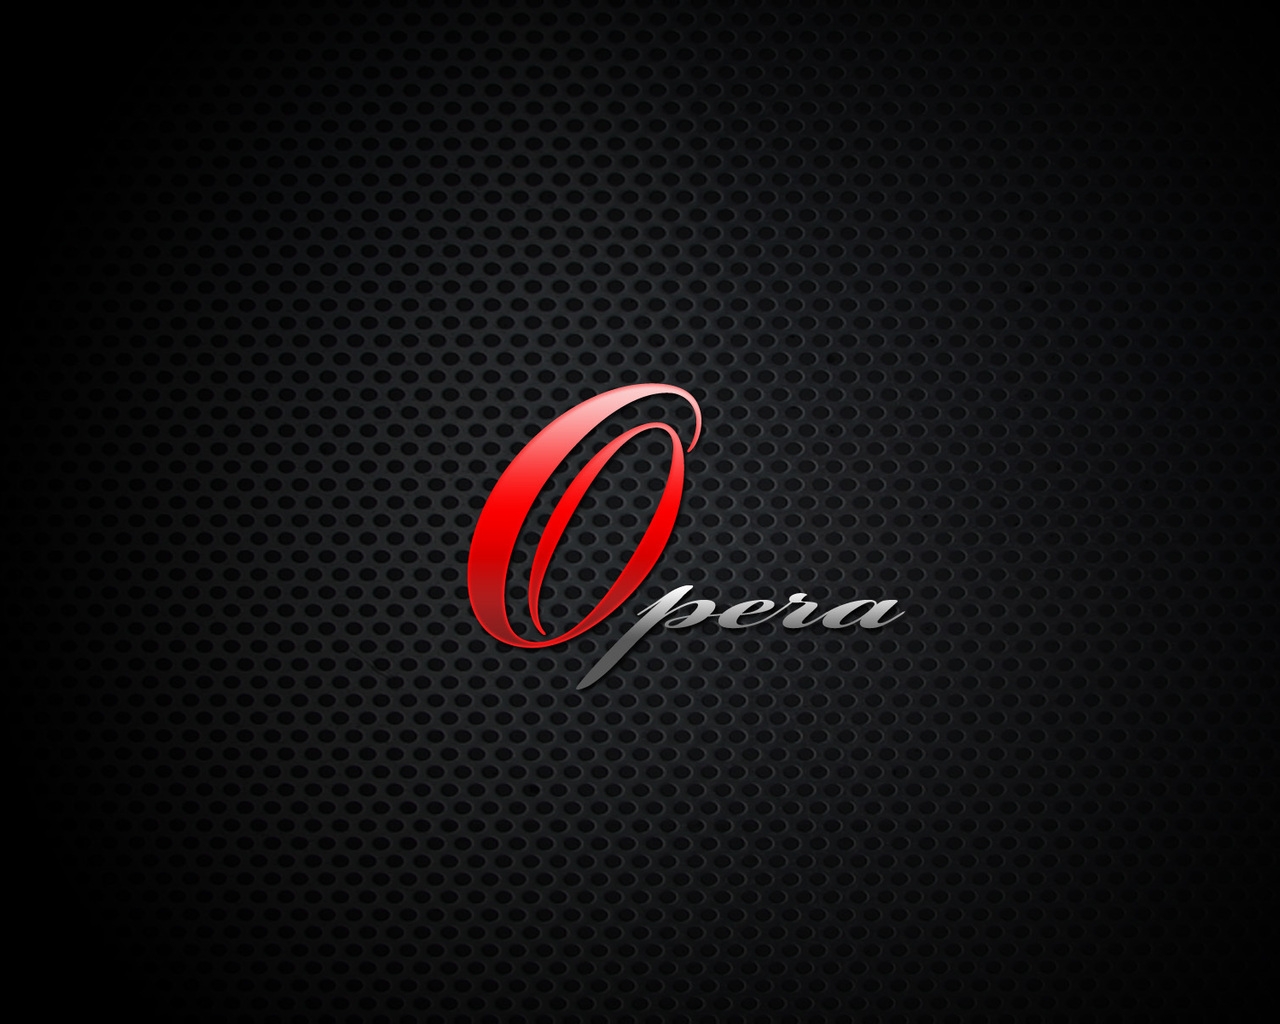 Opera Browser Tech for 1280 x 1024 resolution